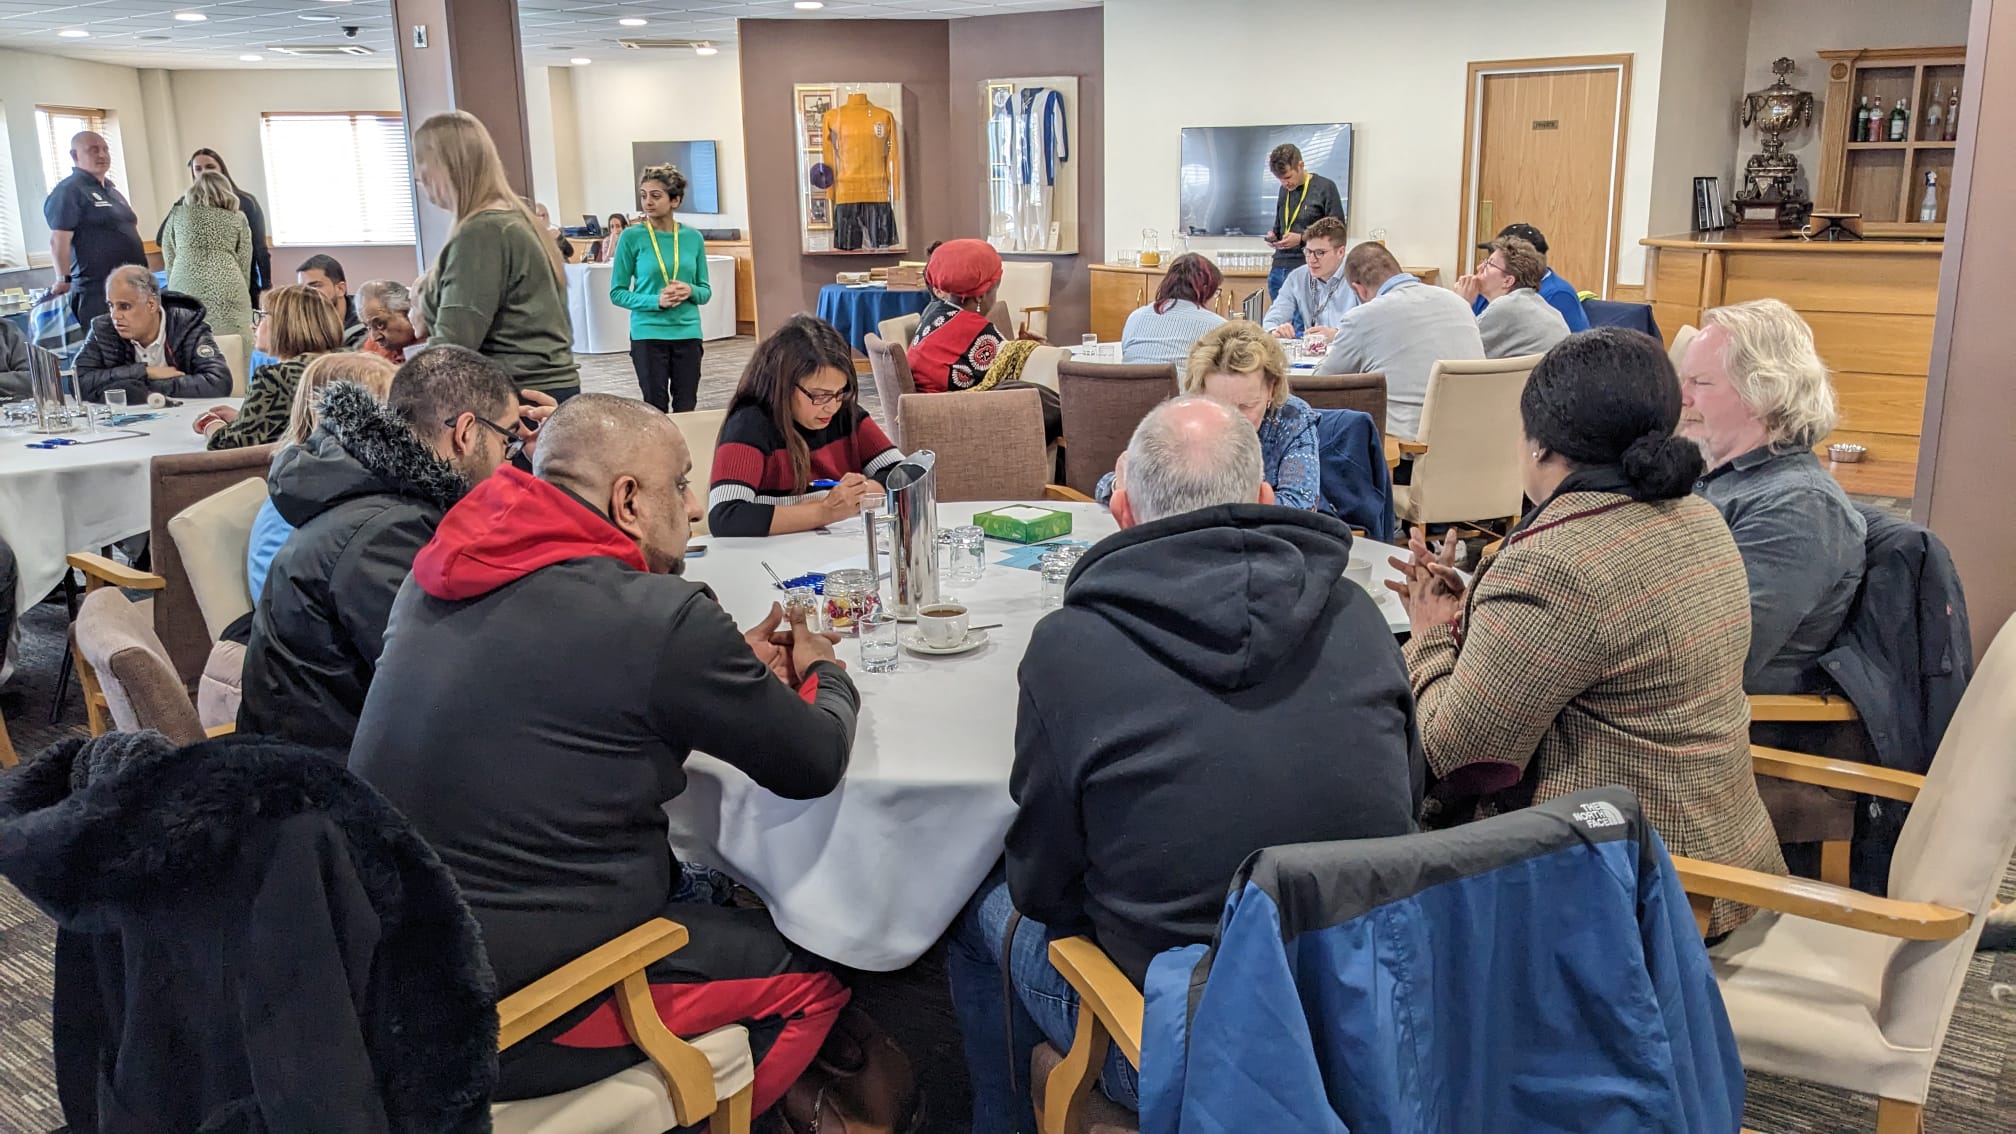 Table discussions with blind and partially sighted delegates, Sight Loss Council members and Jamie Reilly (Vulnerabilities Team, University Hospitals Birmingham). Delegates are sat around circular tables in a large room.